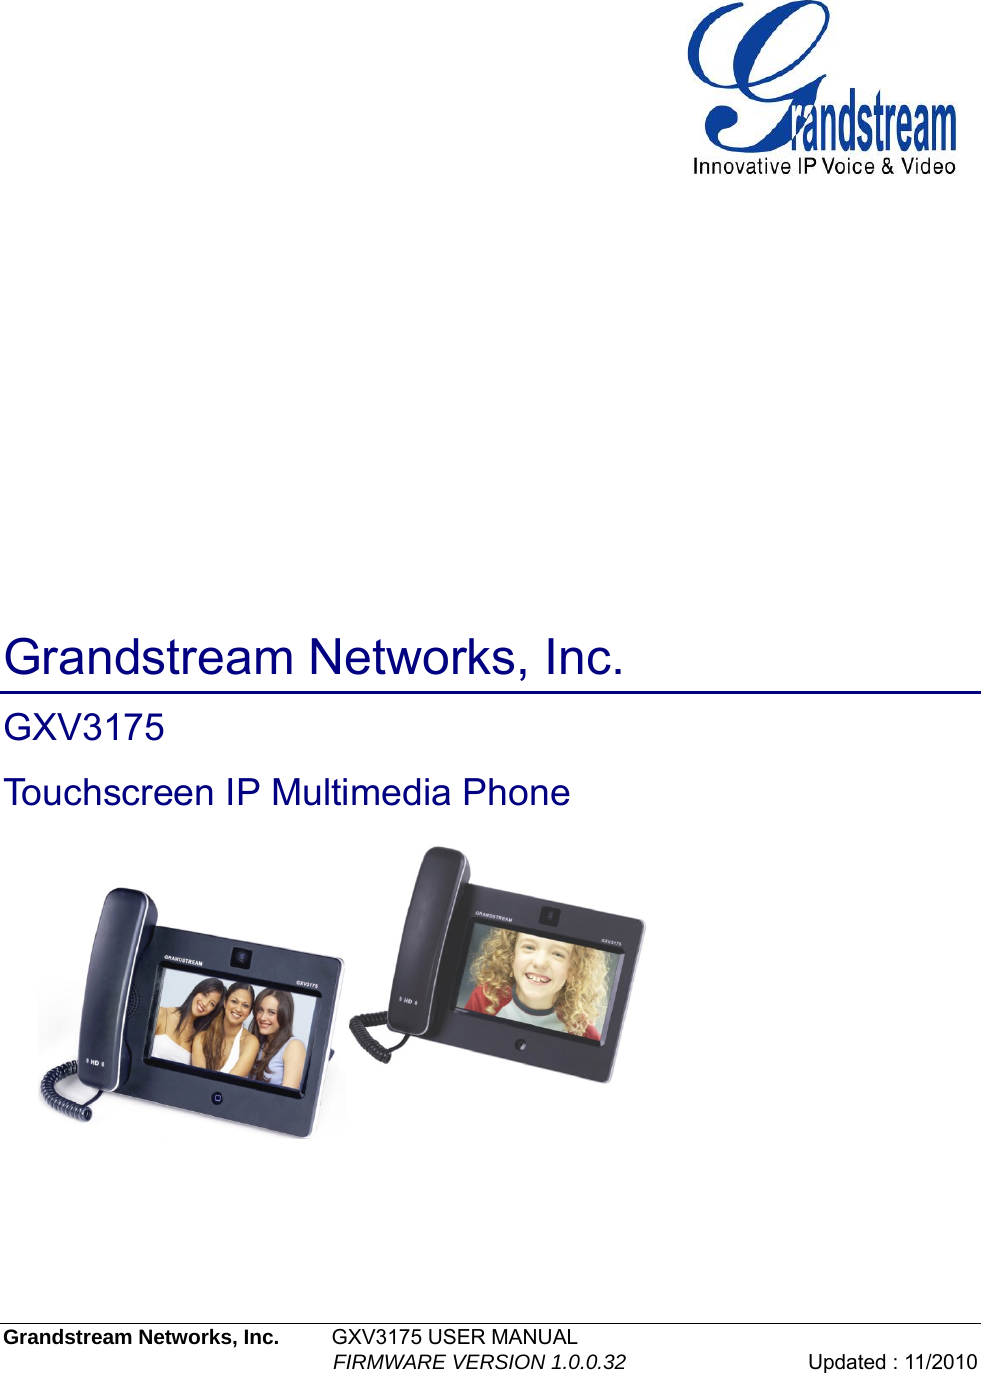               Grandstream Networks, Inc. GXV3175  Touchscreen IP Multimedia Phone  Grandstream Networks, Inc.         GXV3175 USER MANUAL                                                            FIRMWARE VERSION 1.0.0.32  Updated : 11/2010   